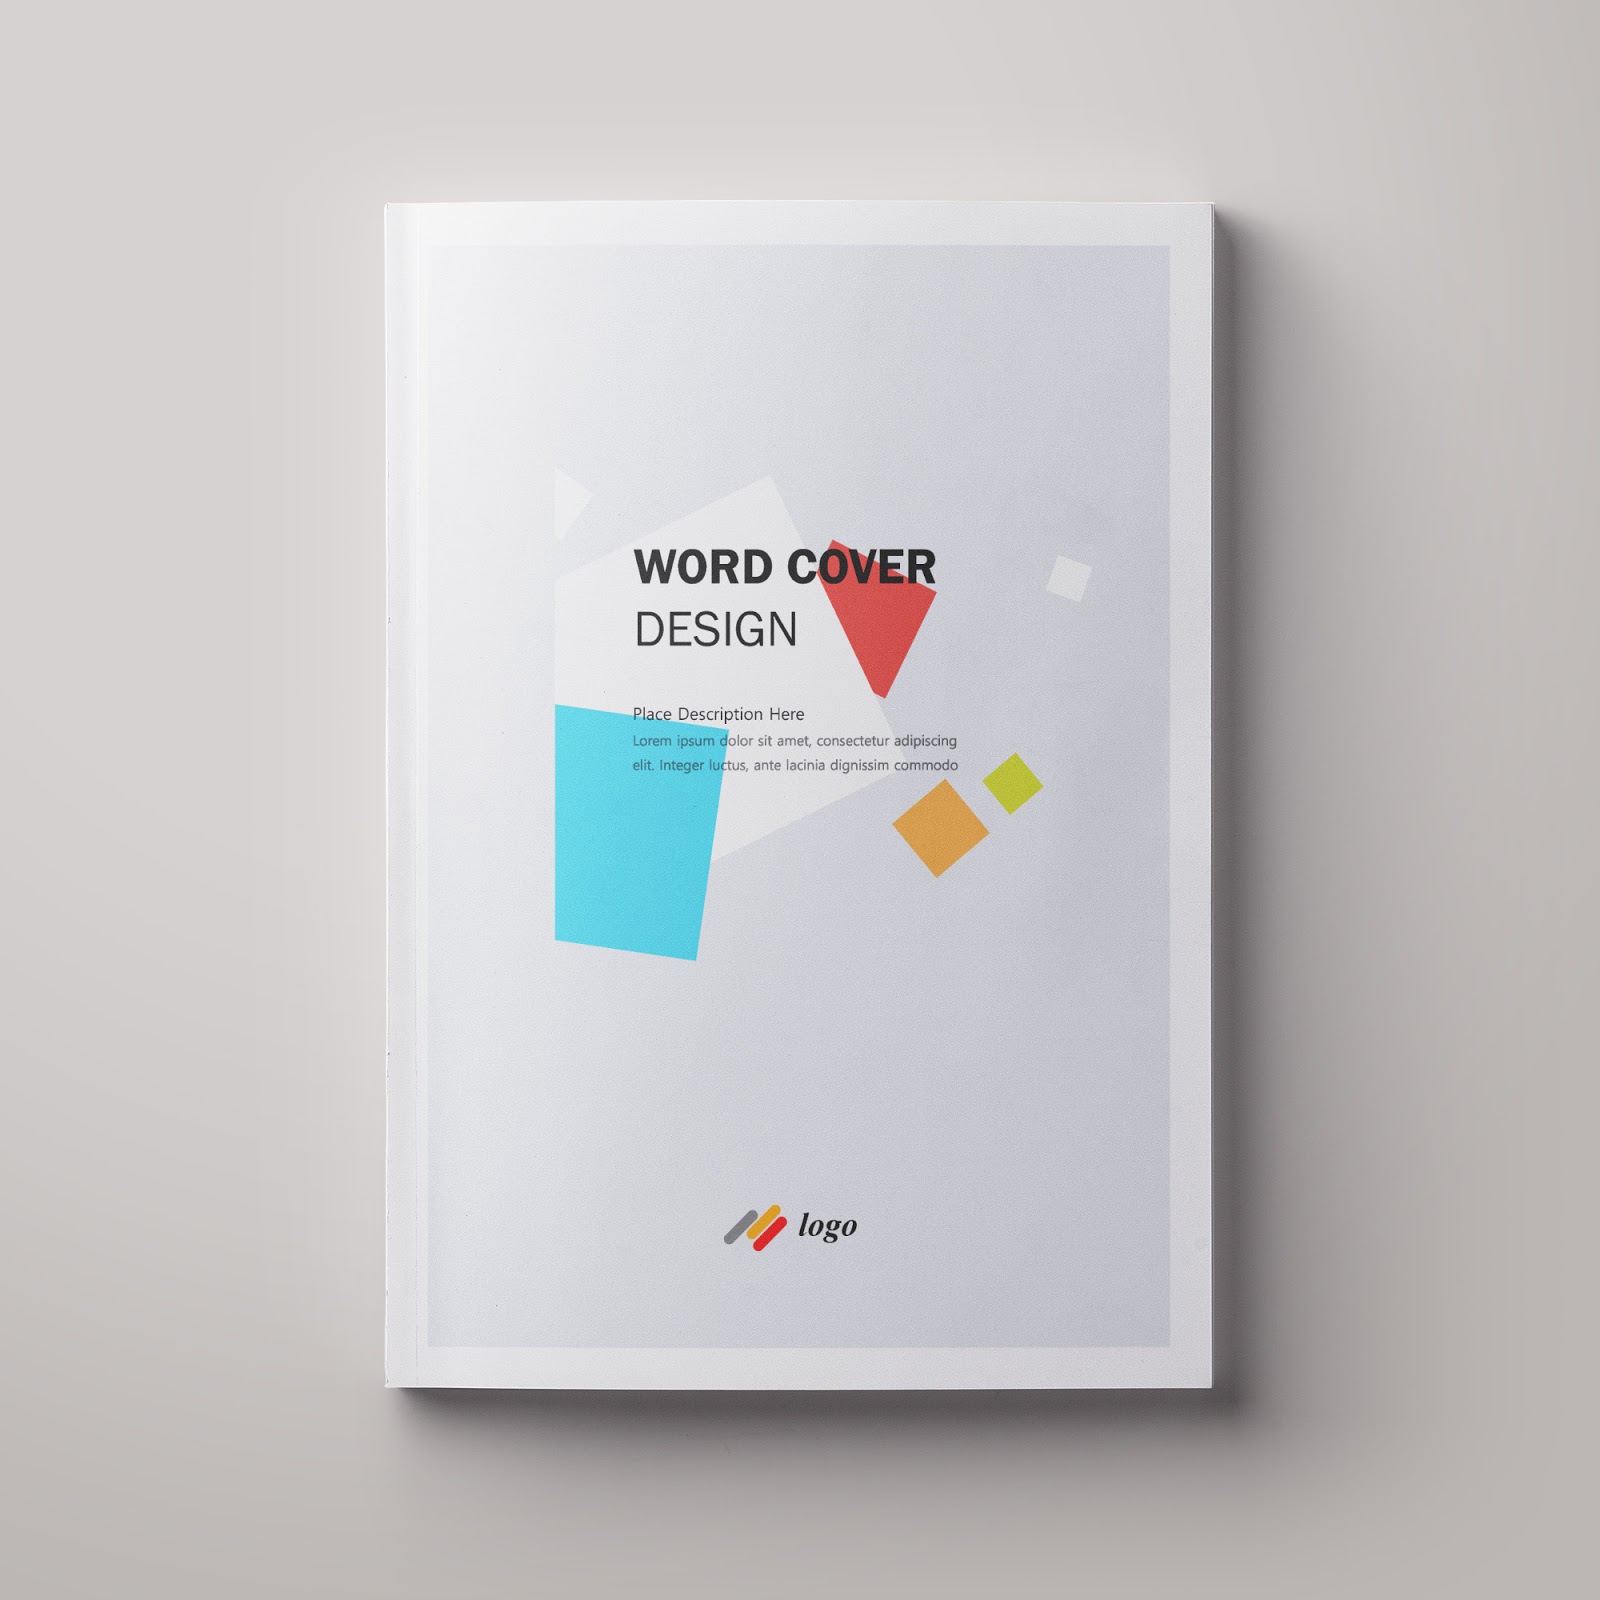 Microsoft Word Cover Templates | 91 Free Download - Word Free